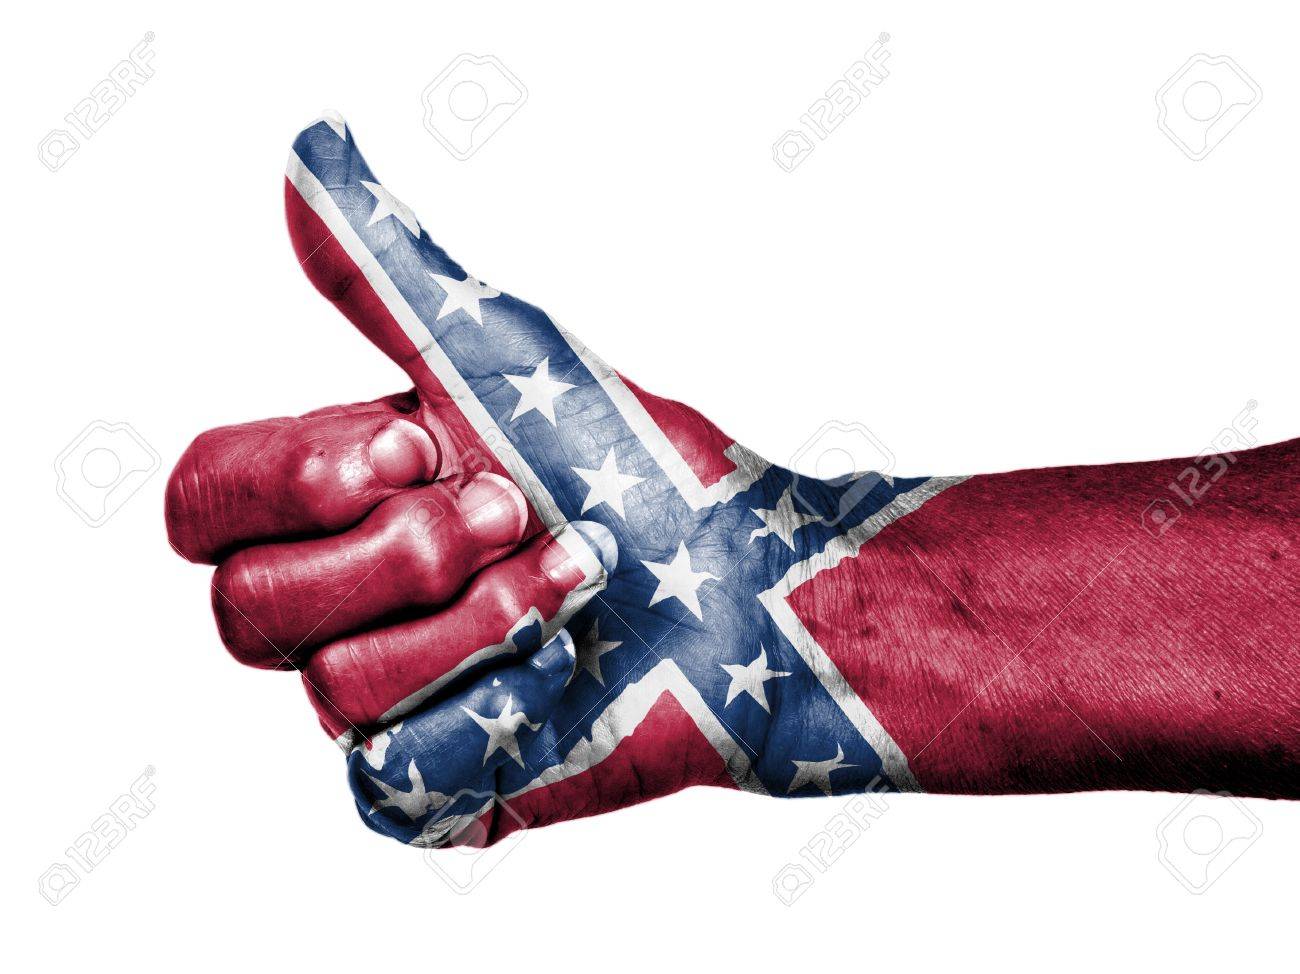 17783615-Old-woman-with-arthritis-giving-the-thumbs-up-sign-isolated-on-white-Confederate-flag-Stock-Photo.jpg